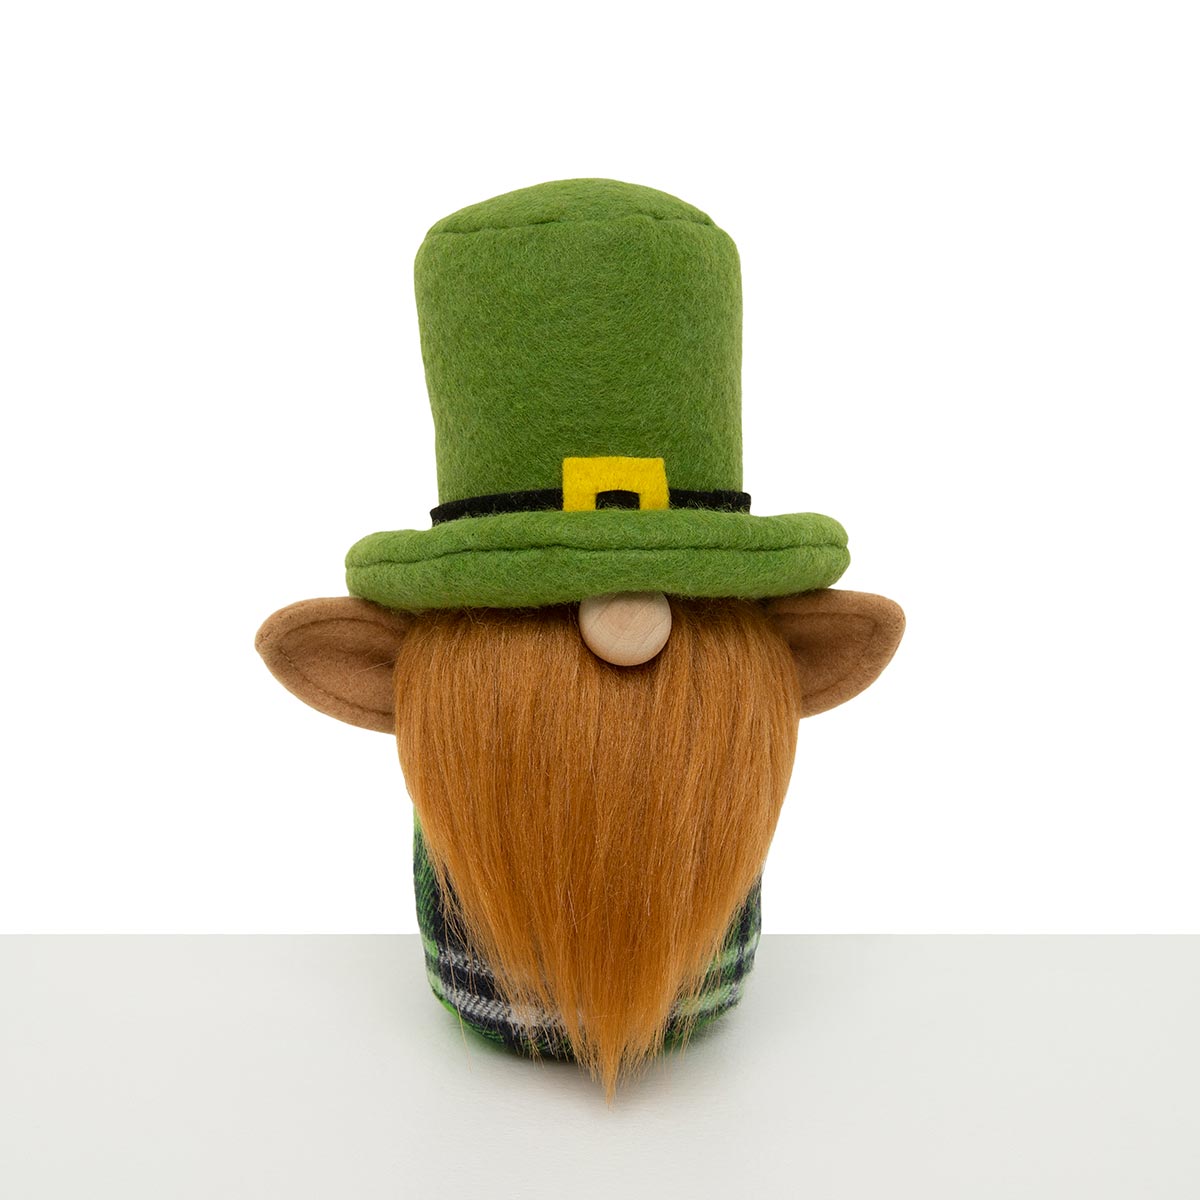 LEPRECHAUN GNOME GREEN WITH BUCKLE HAT, WOOD NOSE,